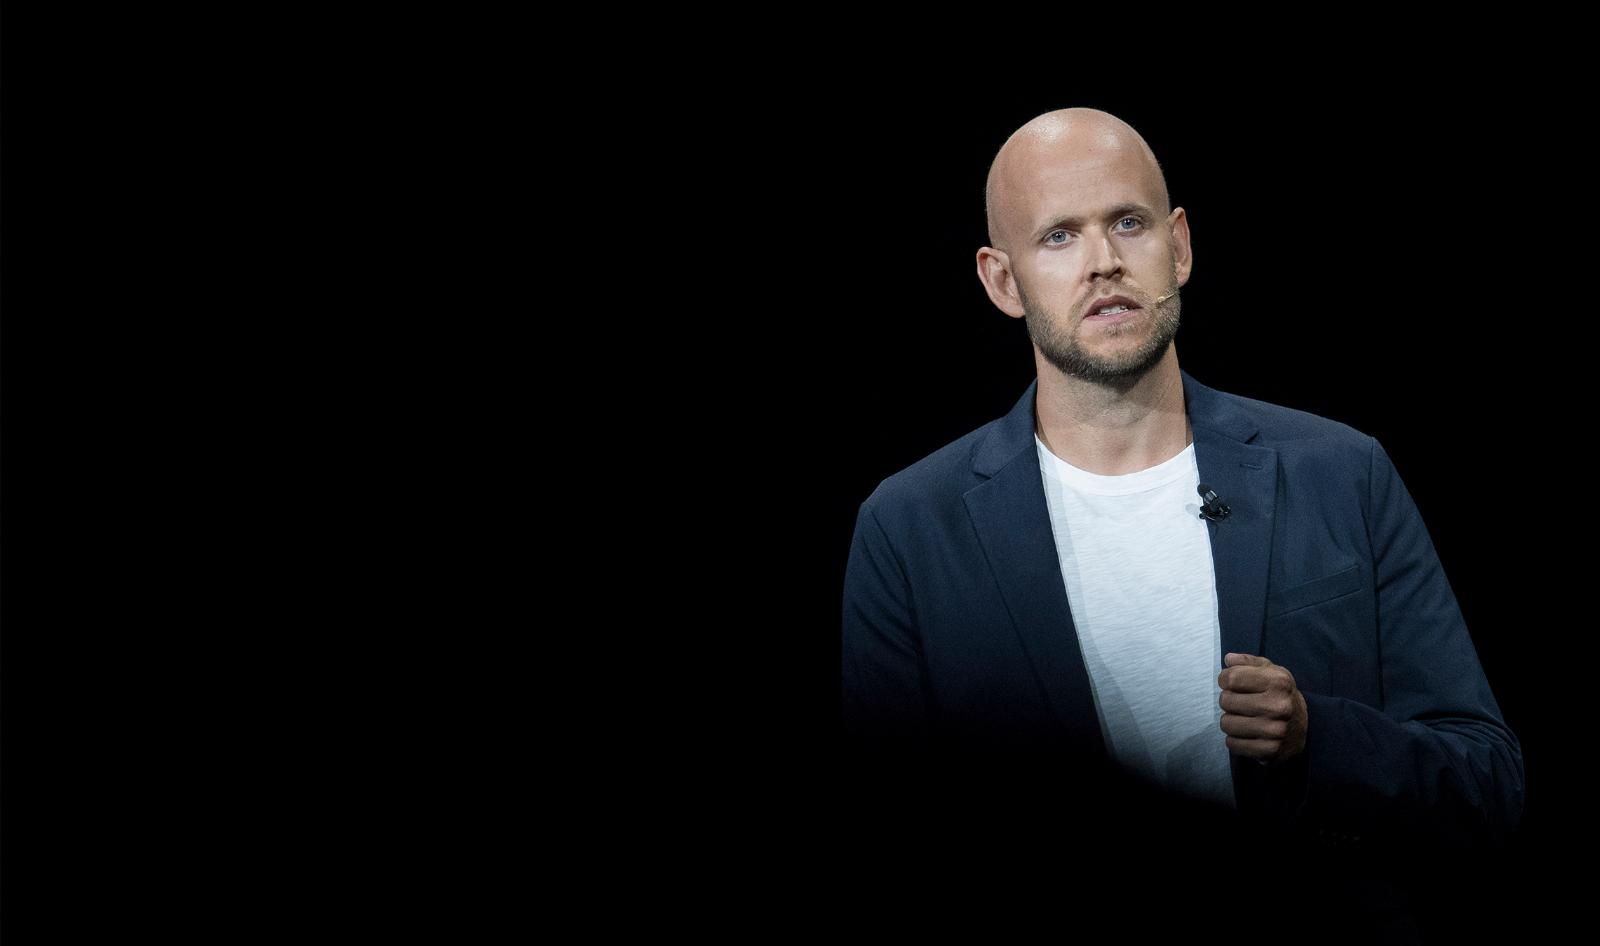 Spotify cuts 6% of its workforce, impacting 600 people